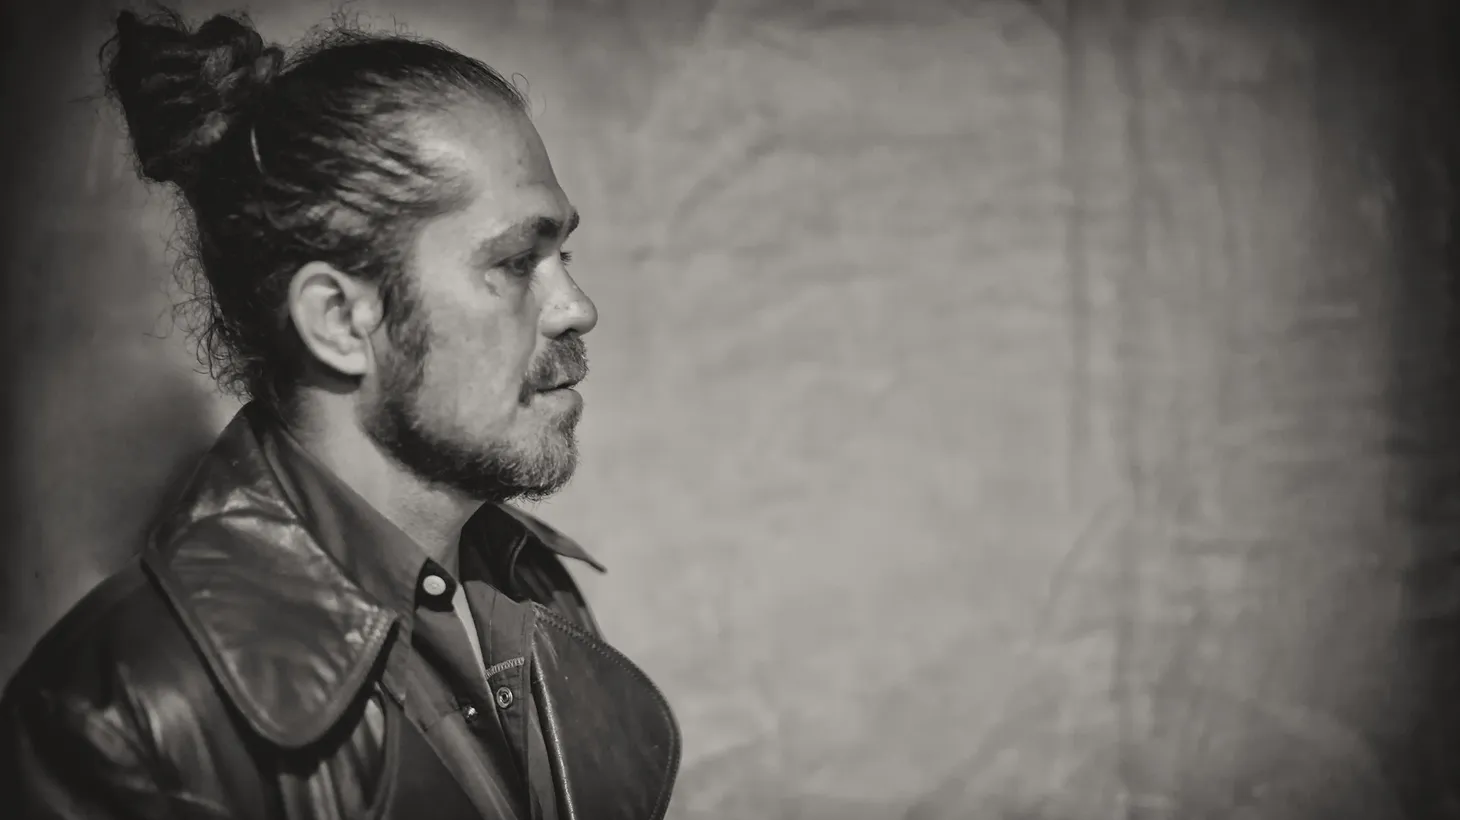 Clarence Greenwood, better known as Citizen Cope, has been making music for seventeen years.